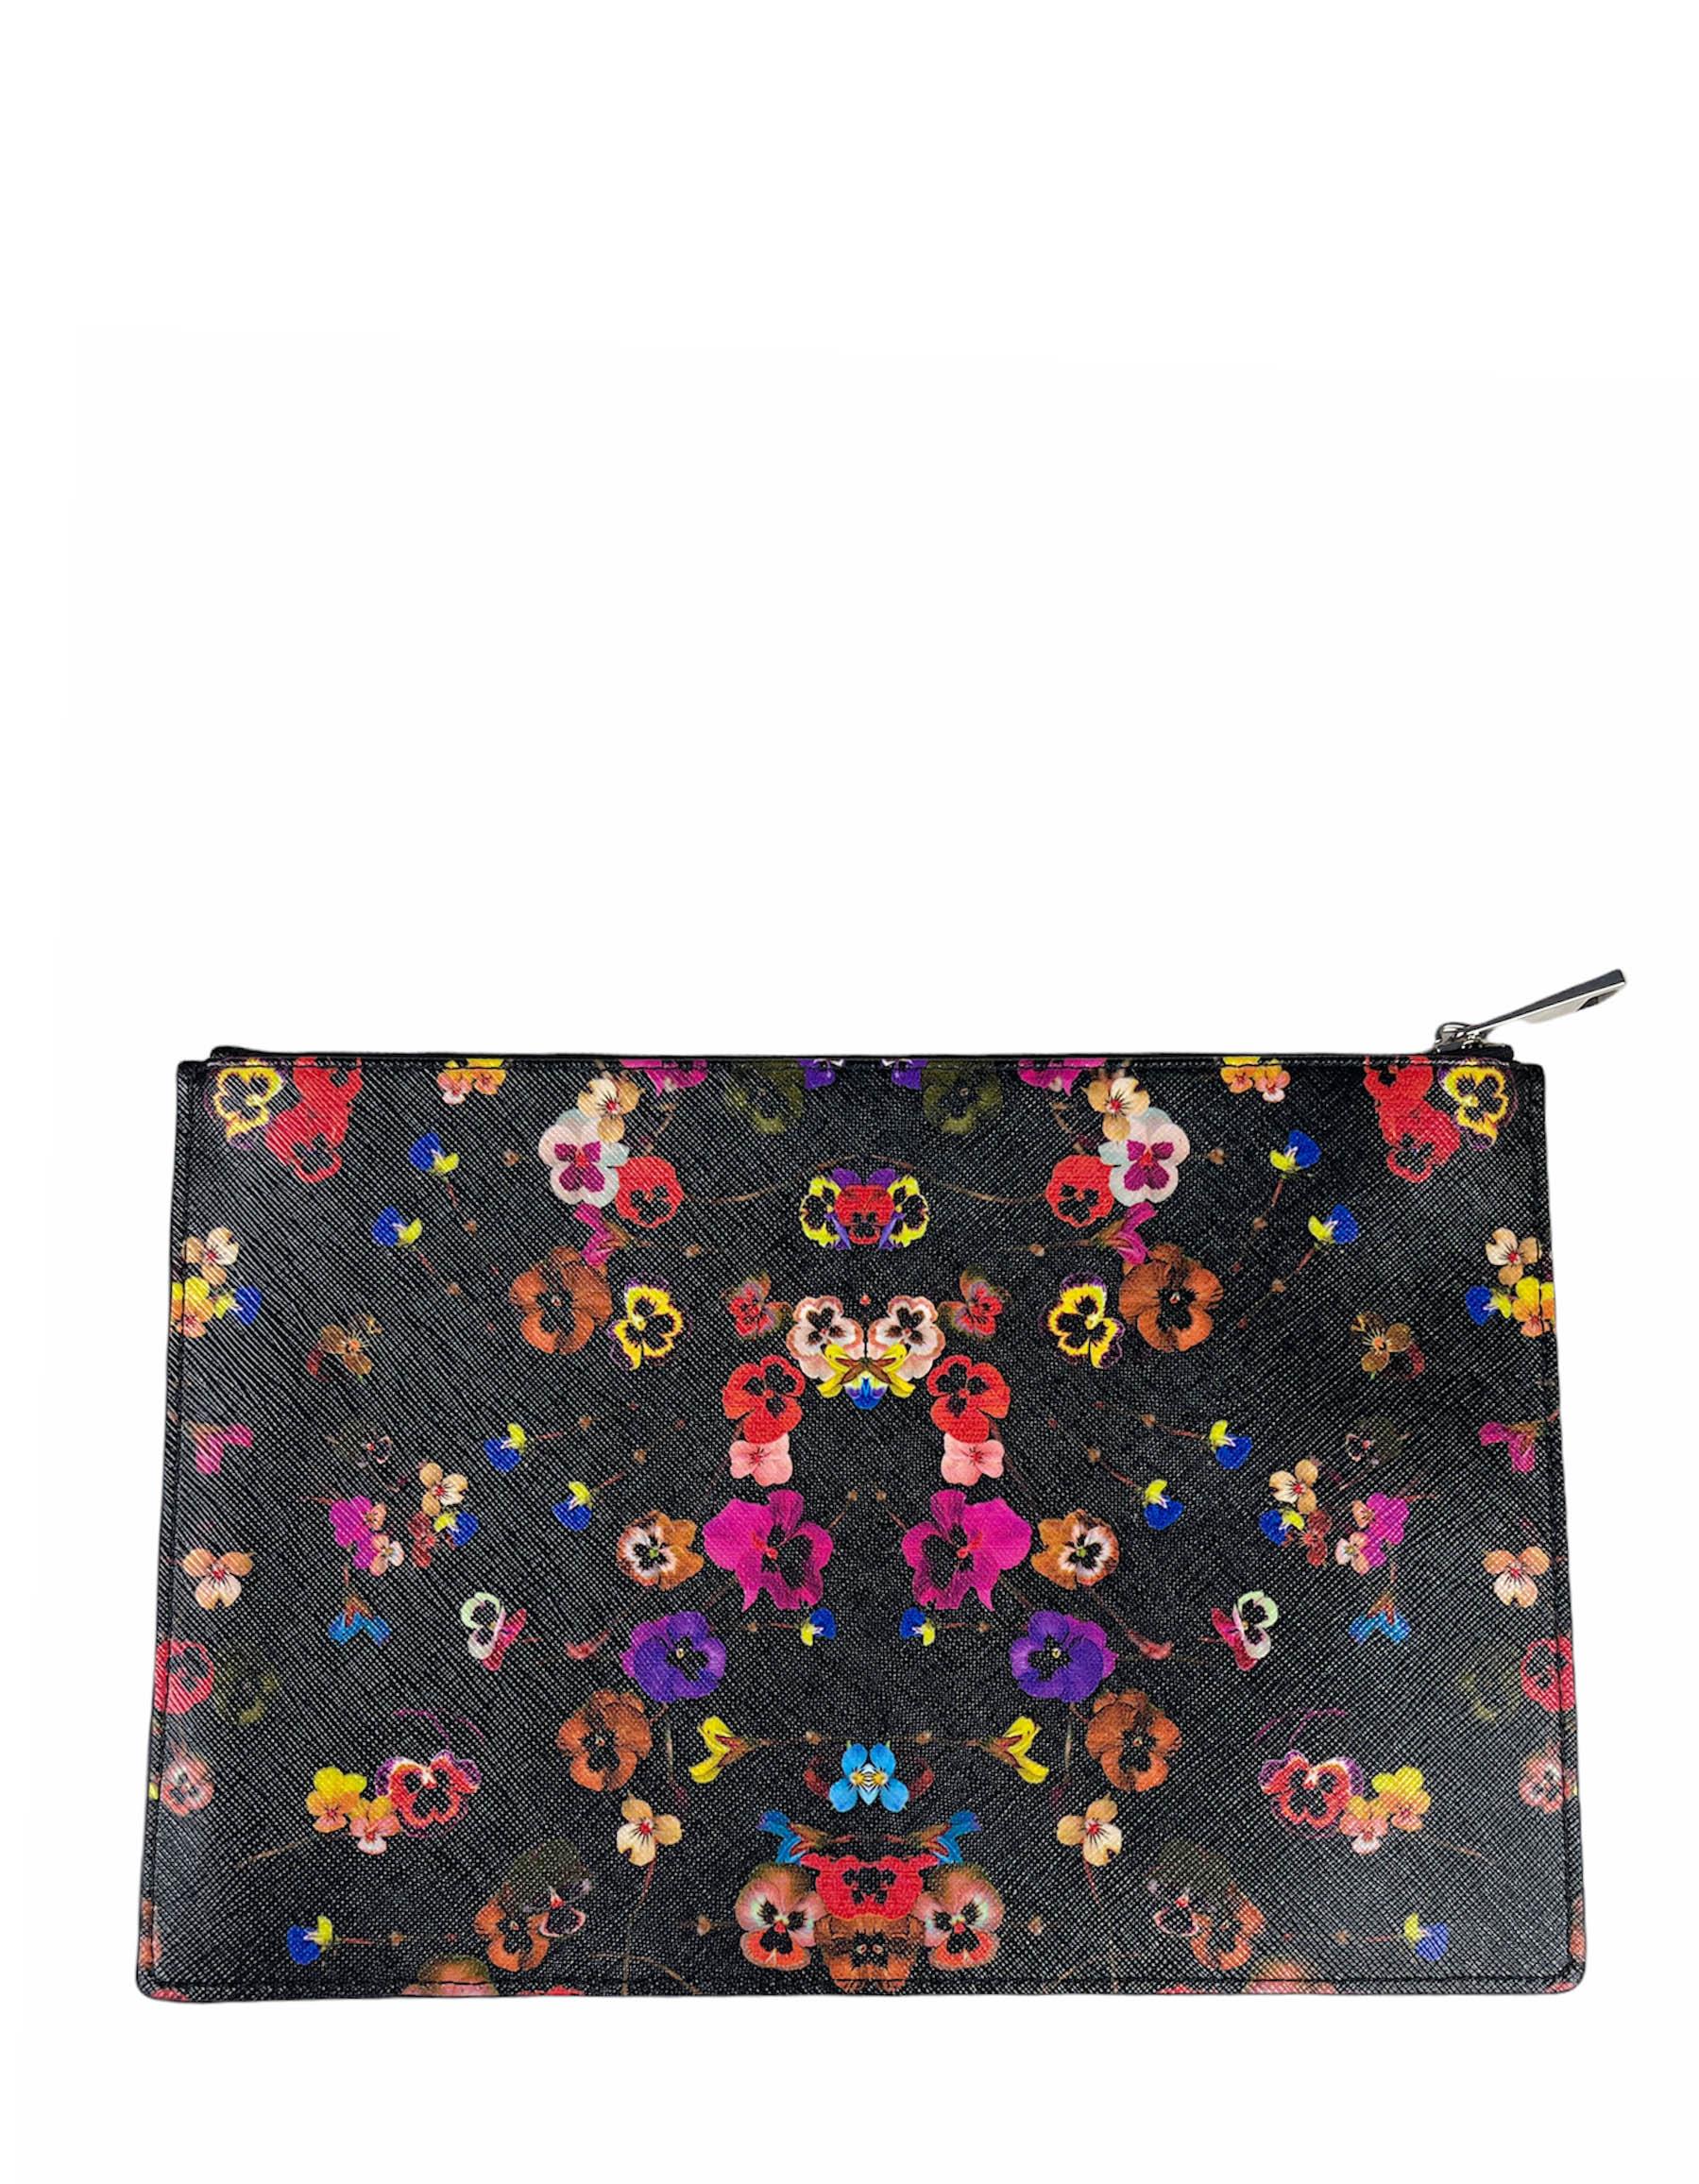 Givenchy Iconic Floral Prints Night Pansy Large Pouch Bag

Made In: Romania
Year of Production: 2017
Color: Black and multicolor
Hardware: Silvertone
Materials: Grained leather
Lining: Black textile
Closure/Opening: Zip top
Interior Pockets: